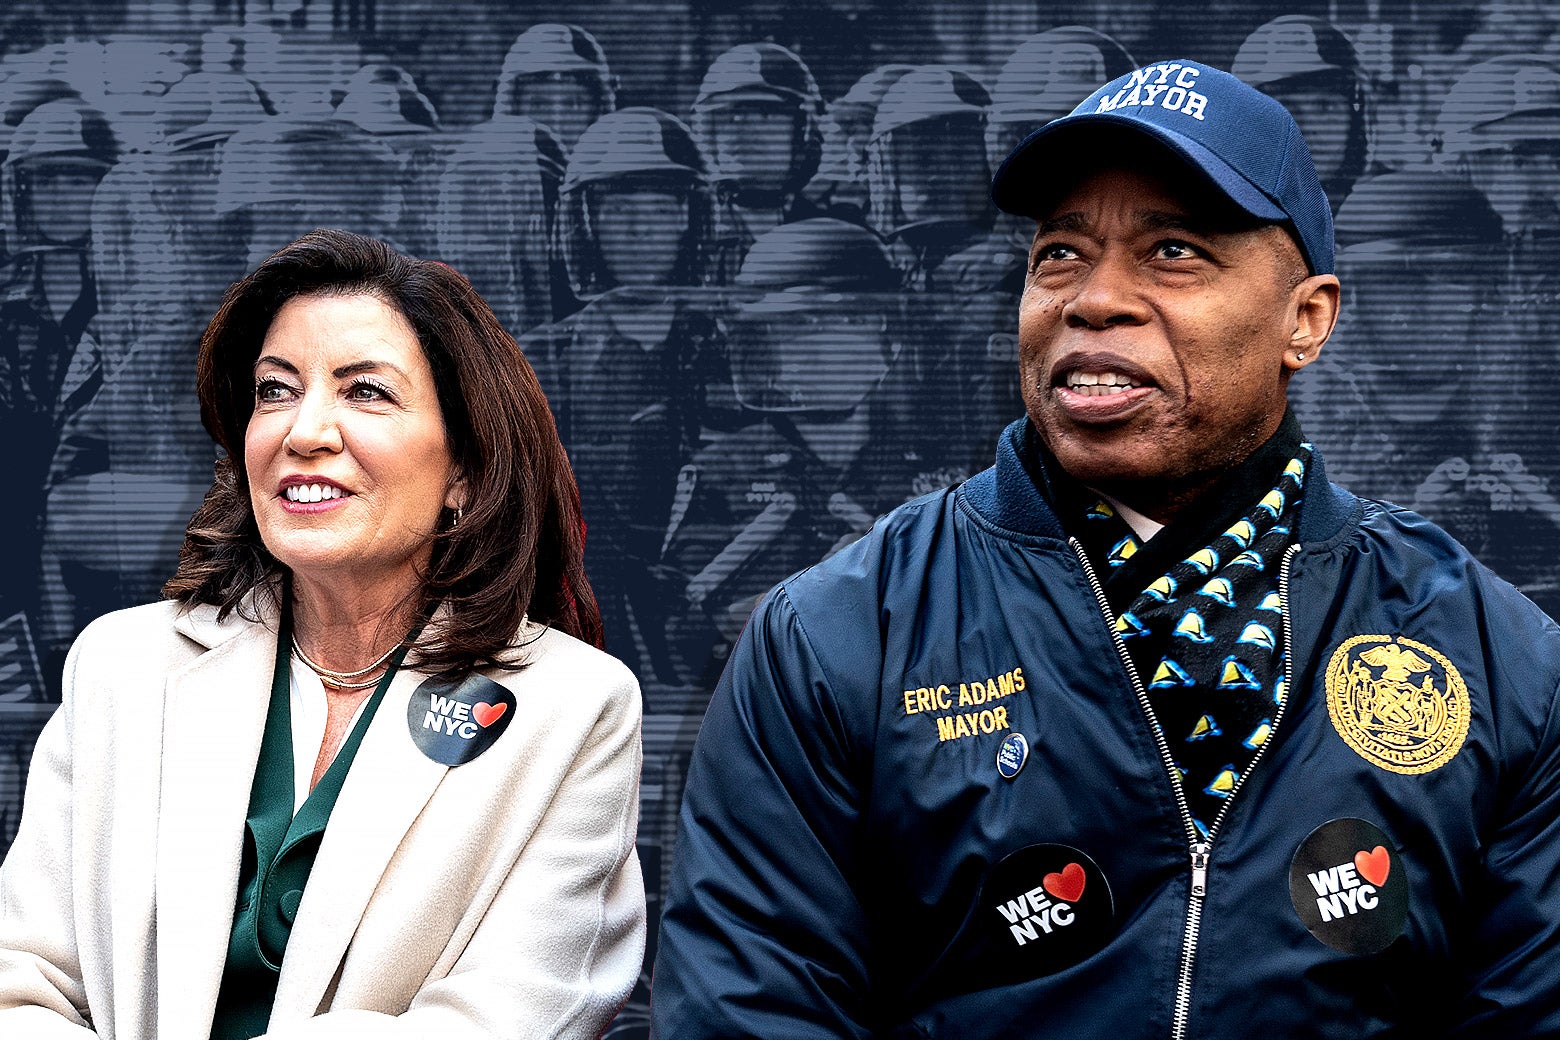 Kathy Hochul and Eric Adams are seen in front of a black-and-white photo of a horde of armed cops.